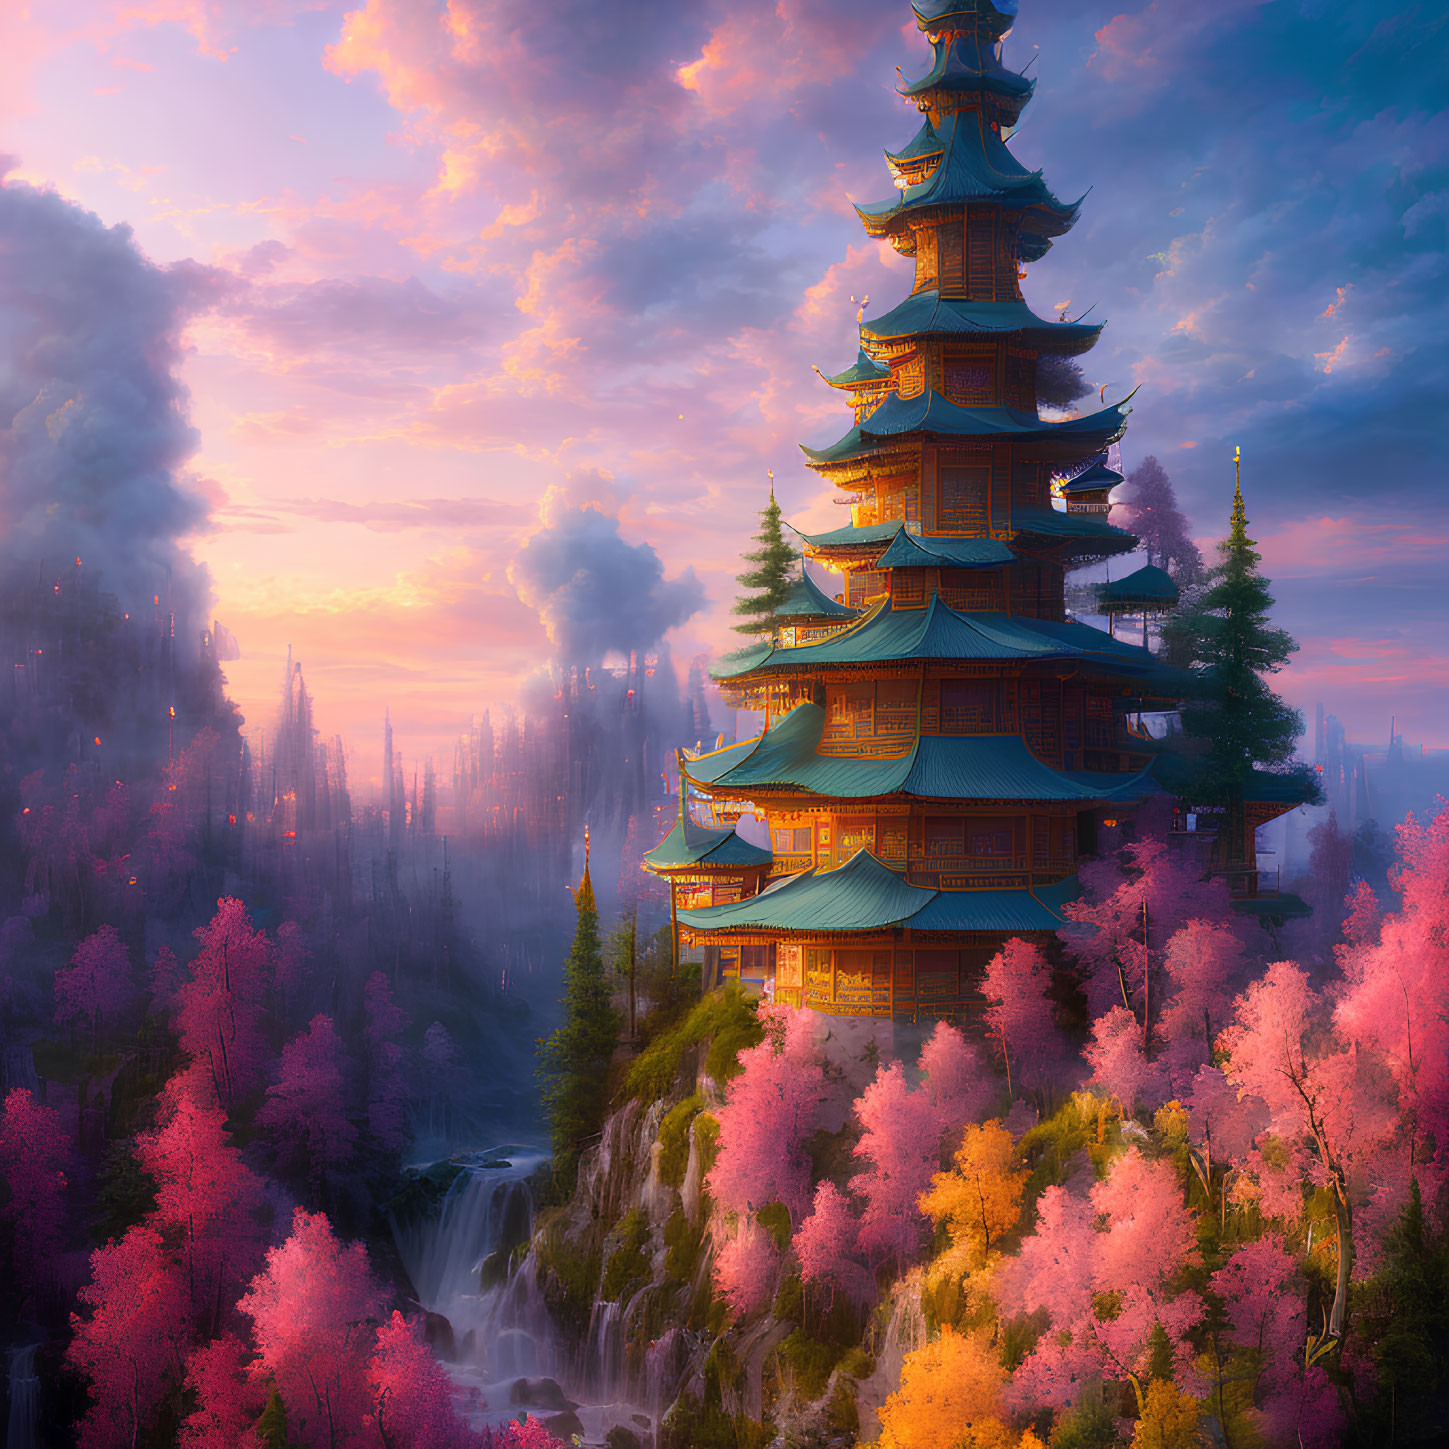 Vibrant Asian Pagoda in Colorful Forest Scene